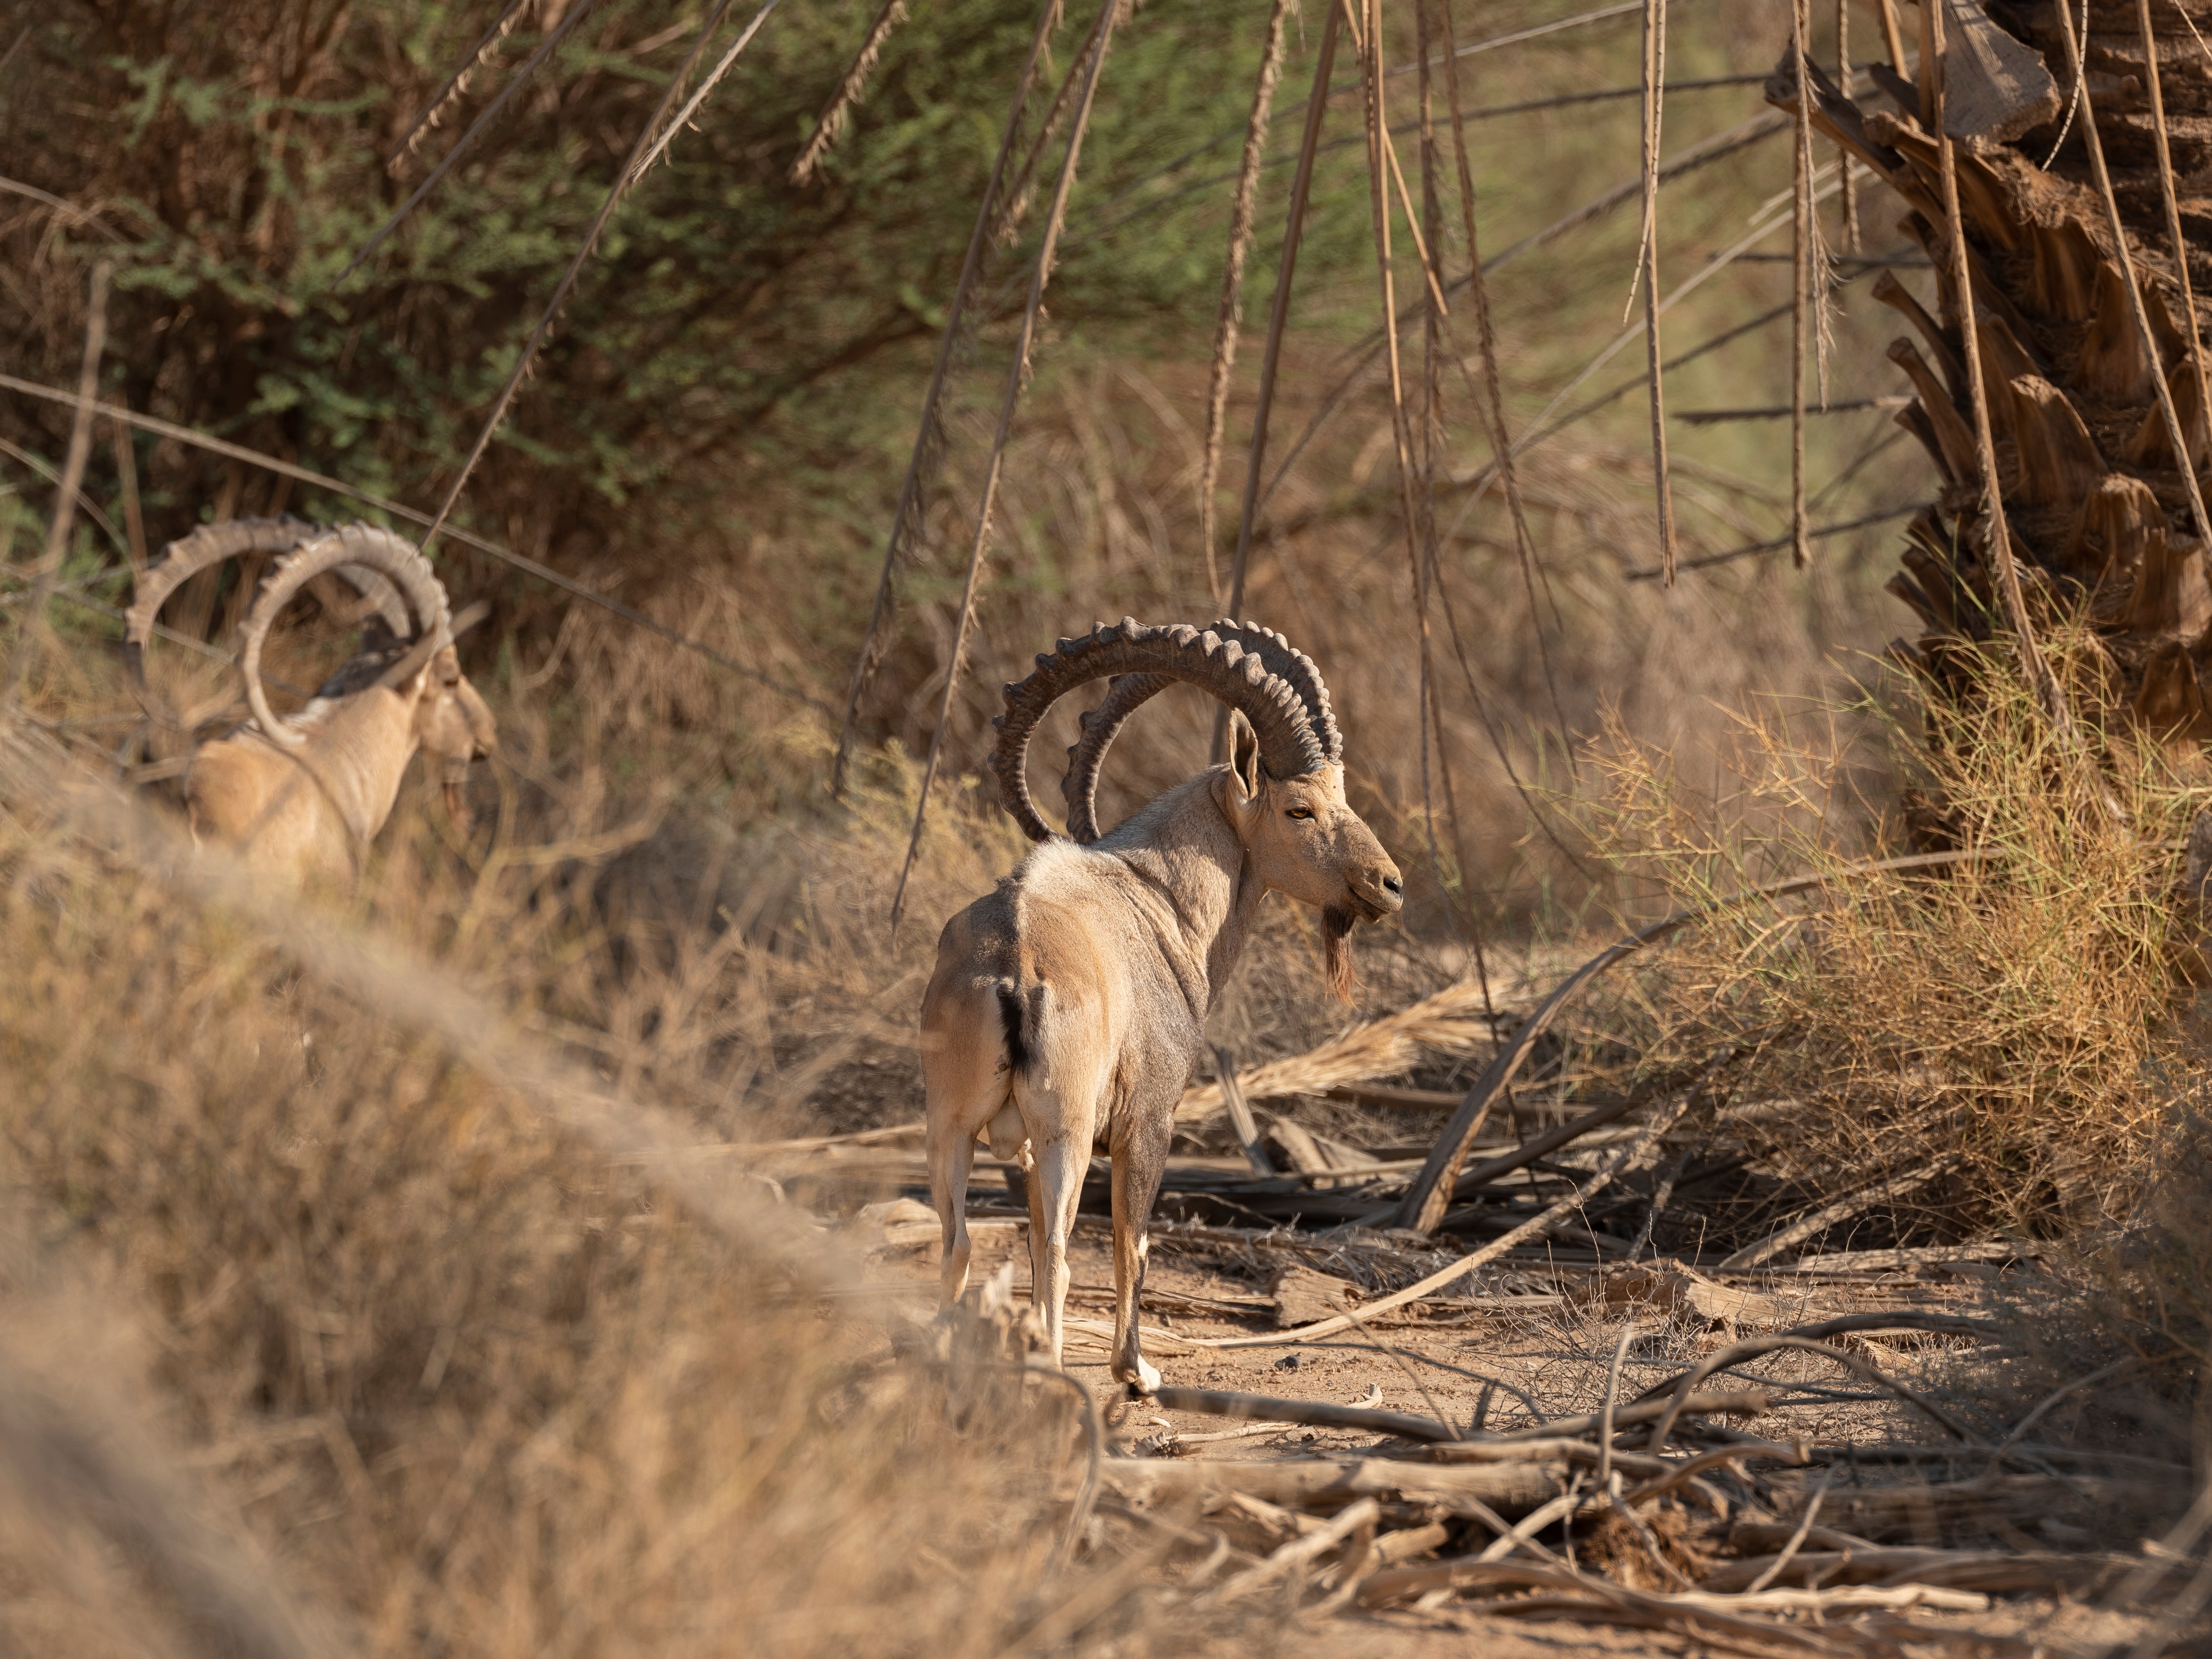 Nubian ibex are classified as extremely vulnerable with fewer than 10,000 mature individuals remaining